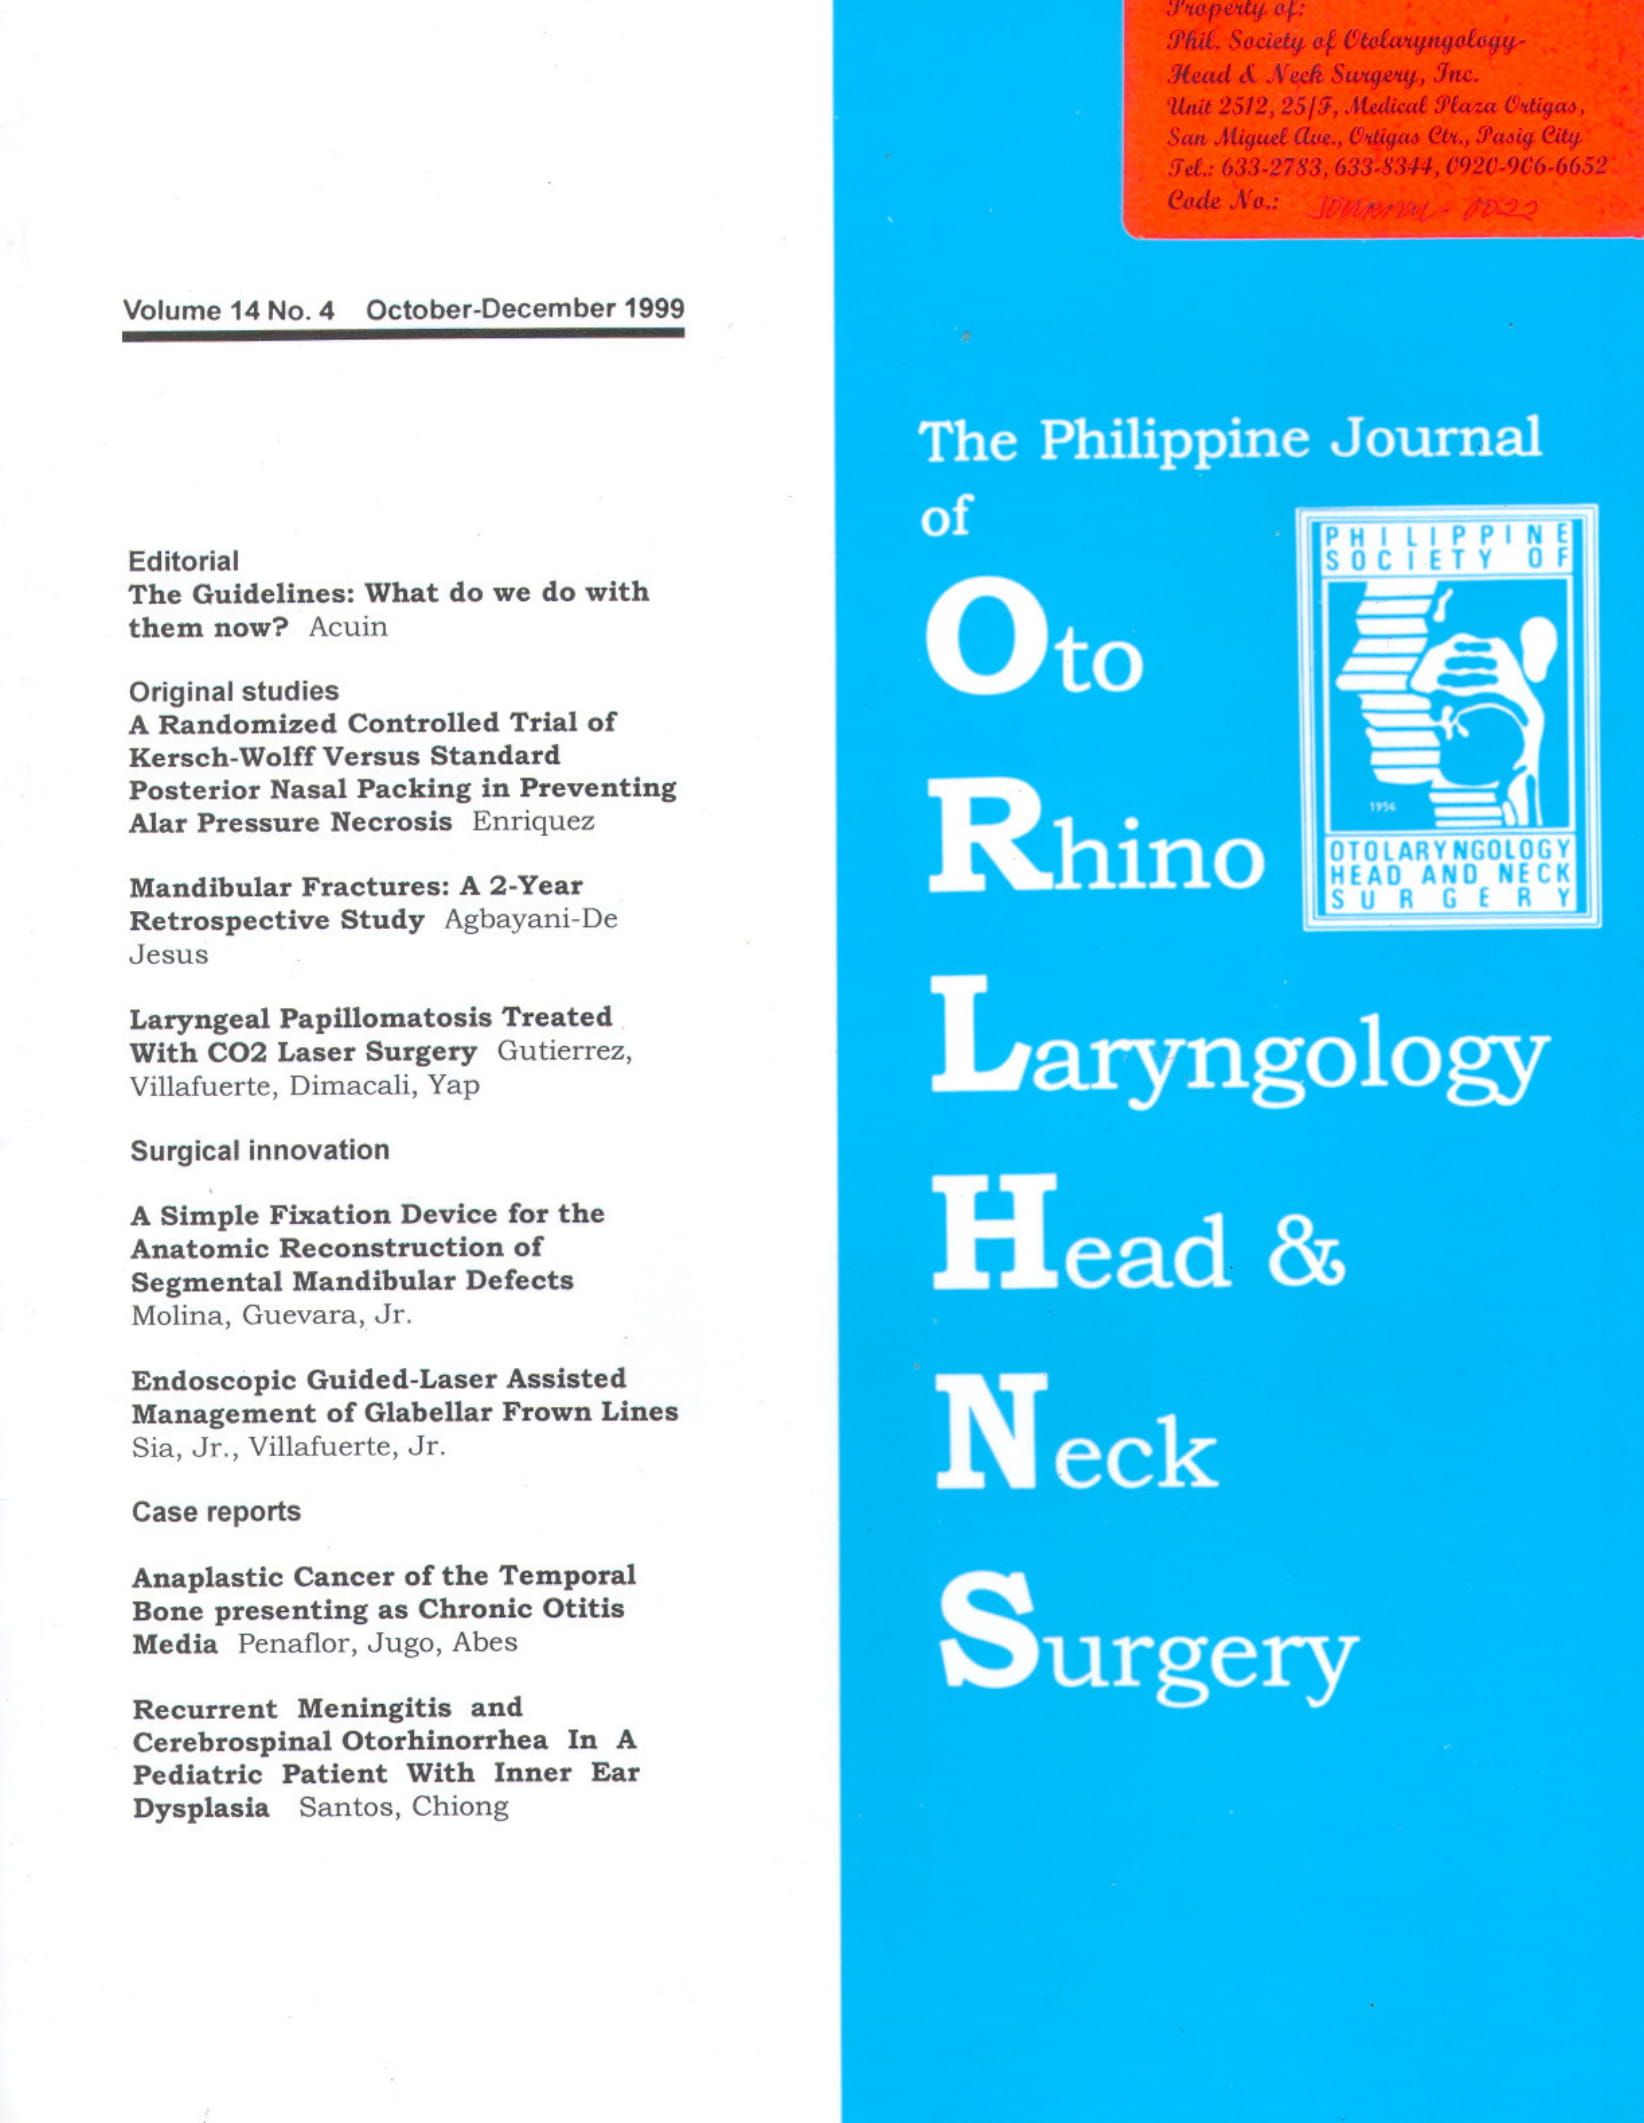 					View Vol. 14 No. 4 (1999): Philippine Journal of Otolaryngology-Head and Neck Surgery
				